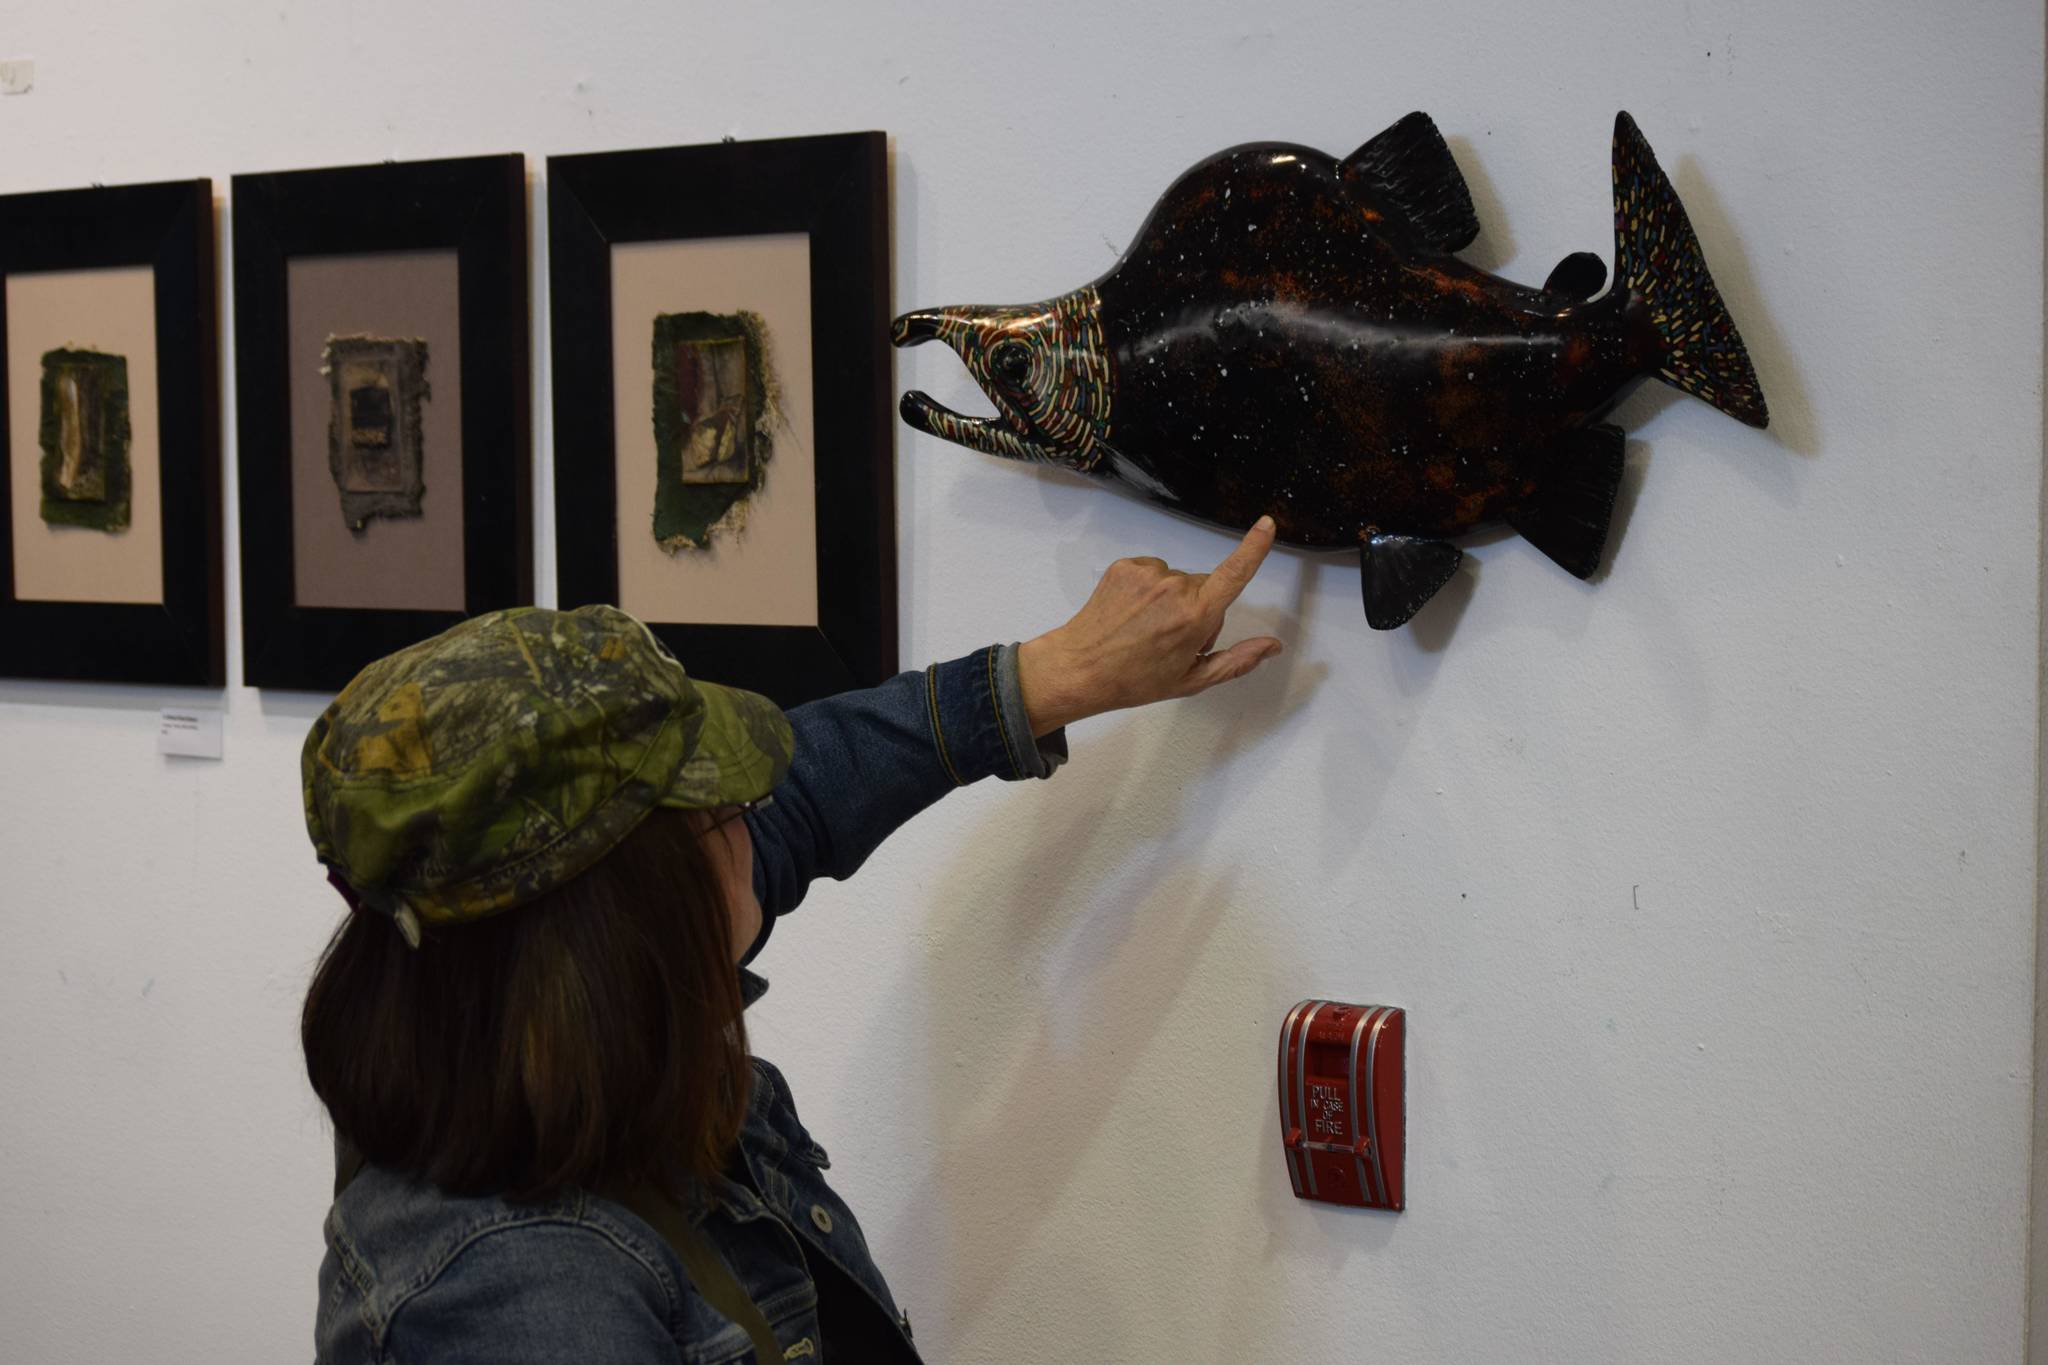 Kathy Matta discusses her lacquer art pieces at the Kenai Chamber of Commerce and Visitor Center on Tuesday, July 27, 2021. (Camille Botello / Peninsula Clarion)